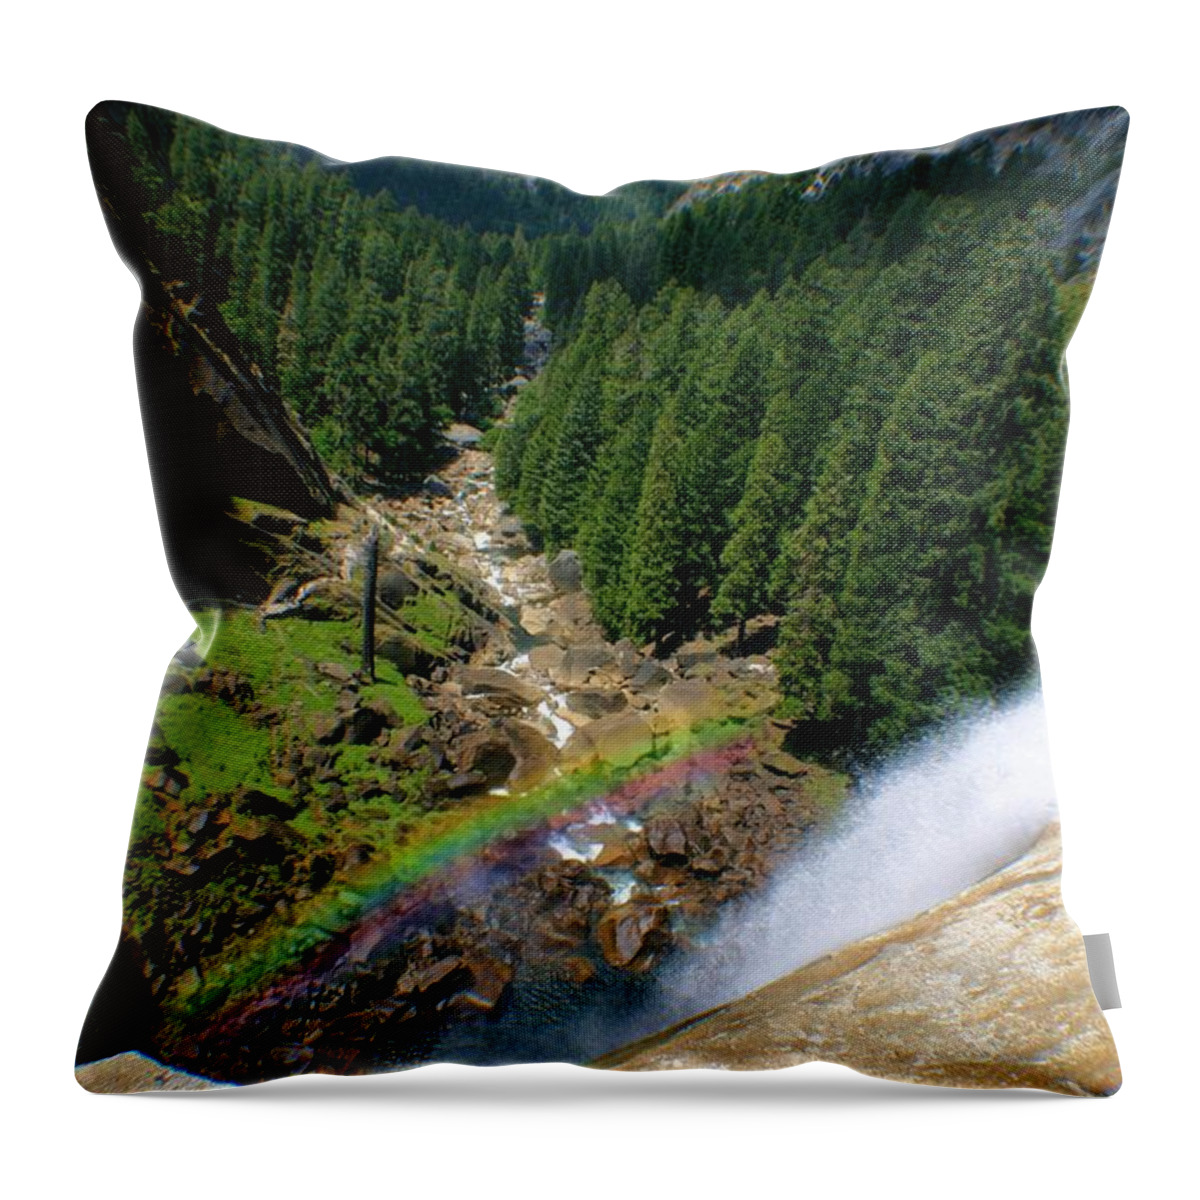 Waterfall Throw Pillow featuring the photograph Rainbow Over Nevada Falls by Jane Girardot